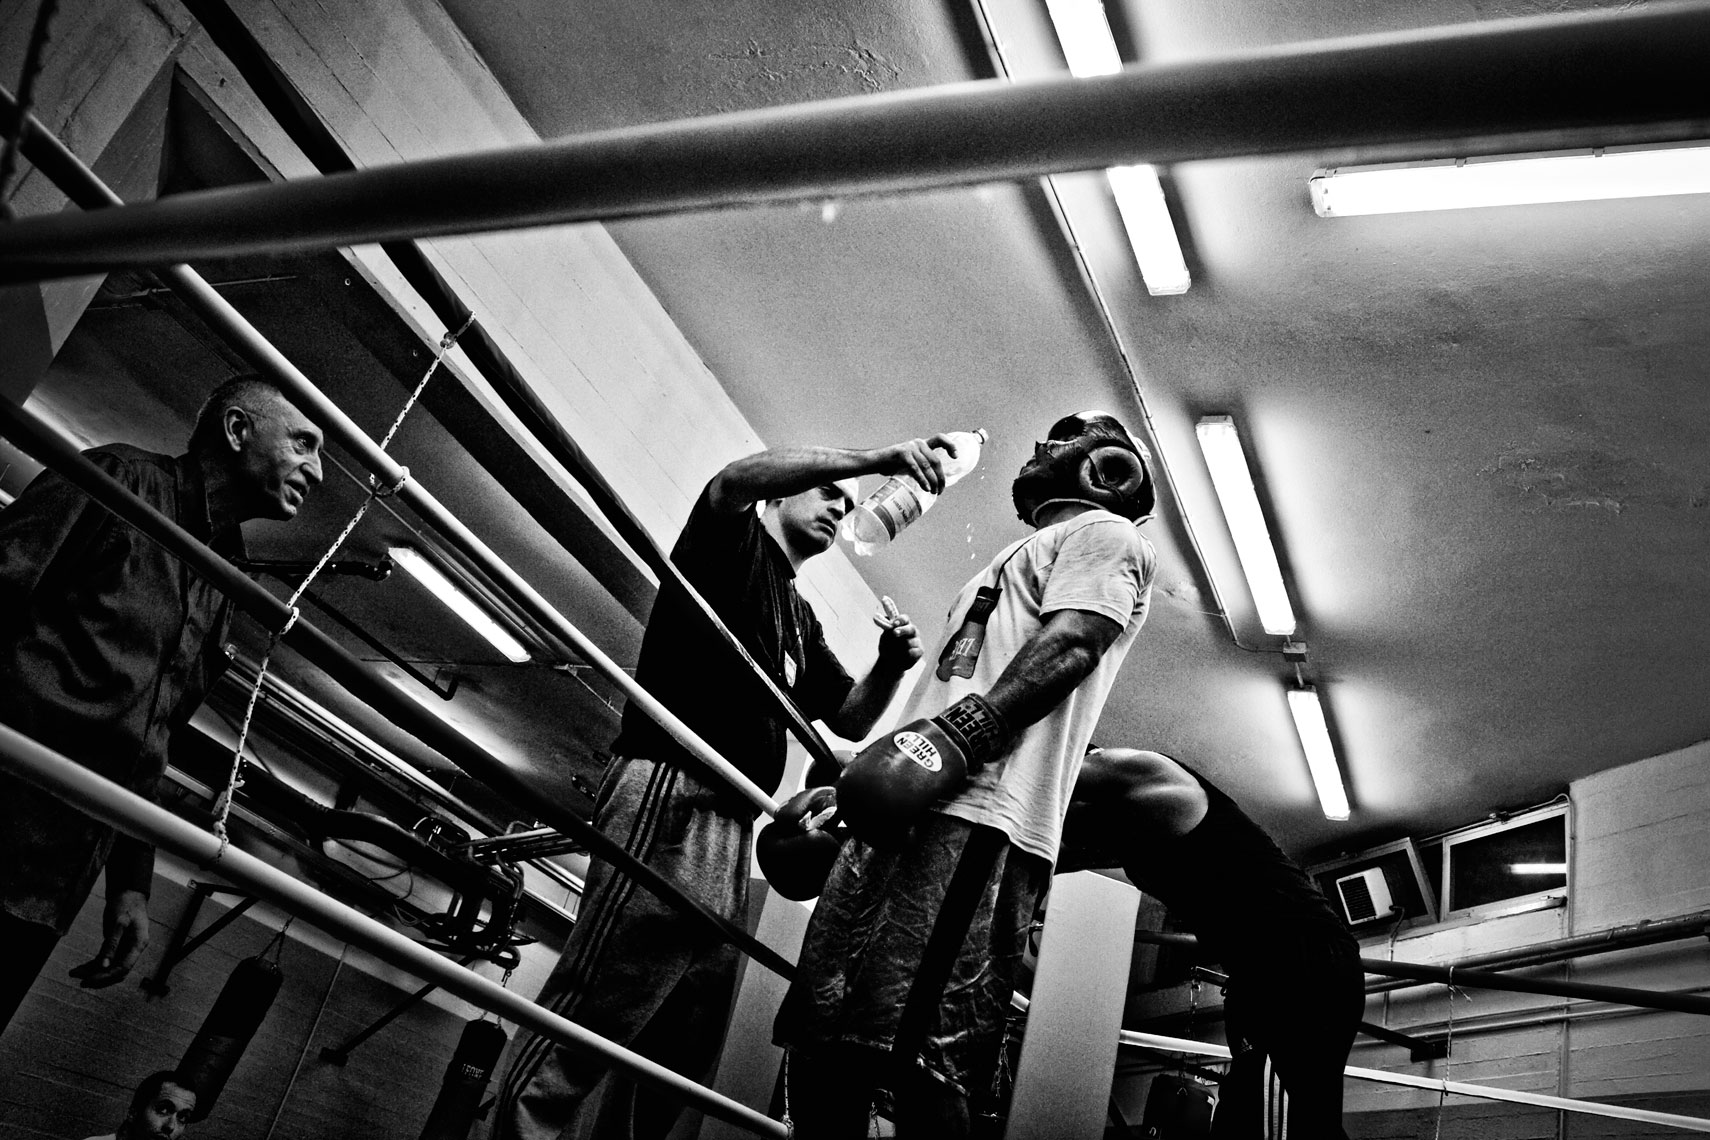 ITALY. Florence, 6th October 2011. Leonard Bundu drinking some water by the help of his sparring partner trainer during the preparation of the match for the EBU (European Boxing Union) Welter Weight crown. On the left Bundu's master and trainer Alessandro Boncinelli.